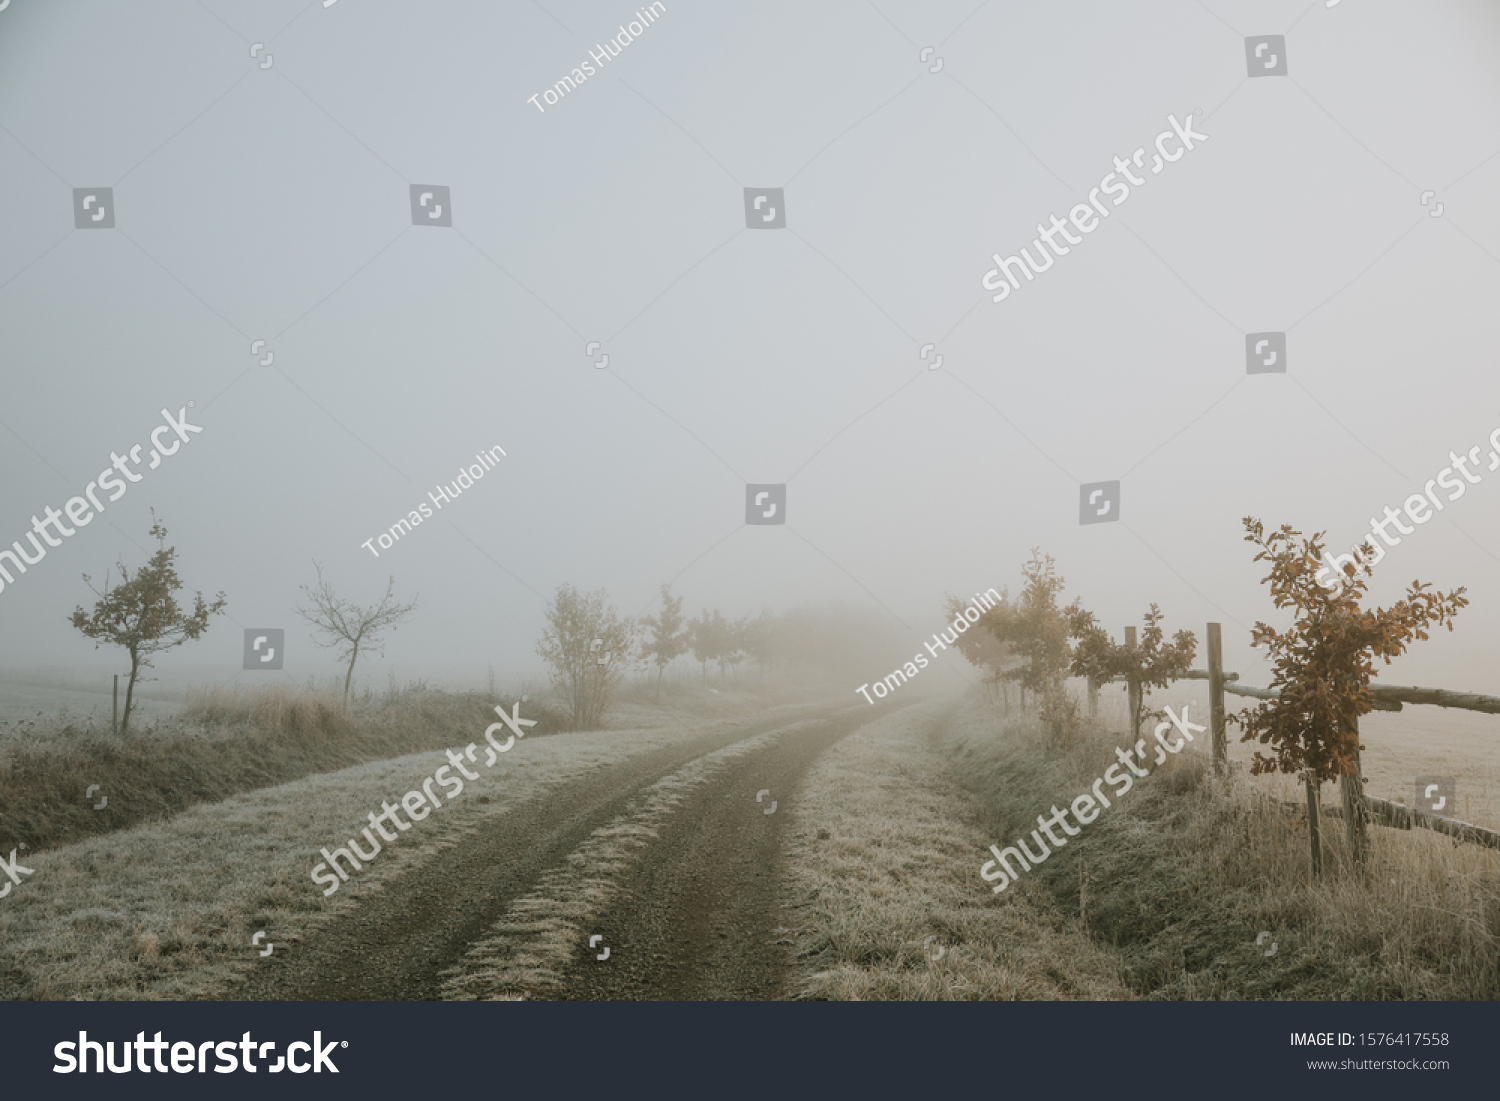 Road Lined Small Oak Trees Between Stock Image Download Now